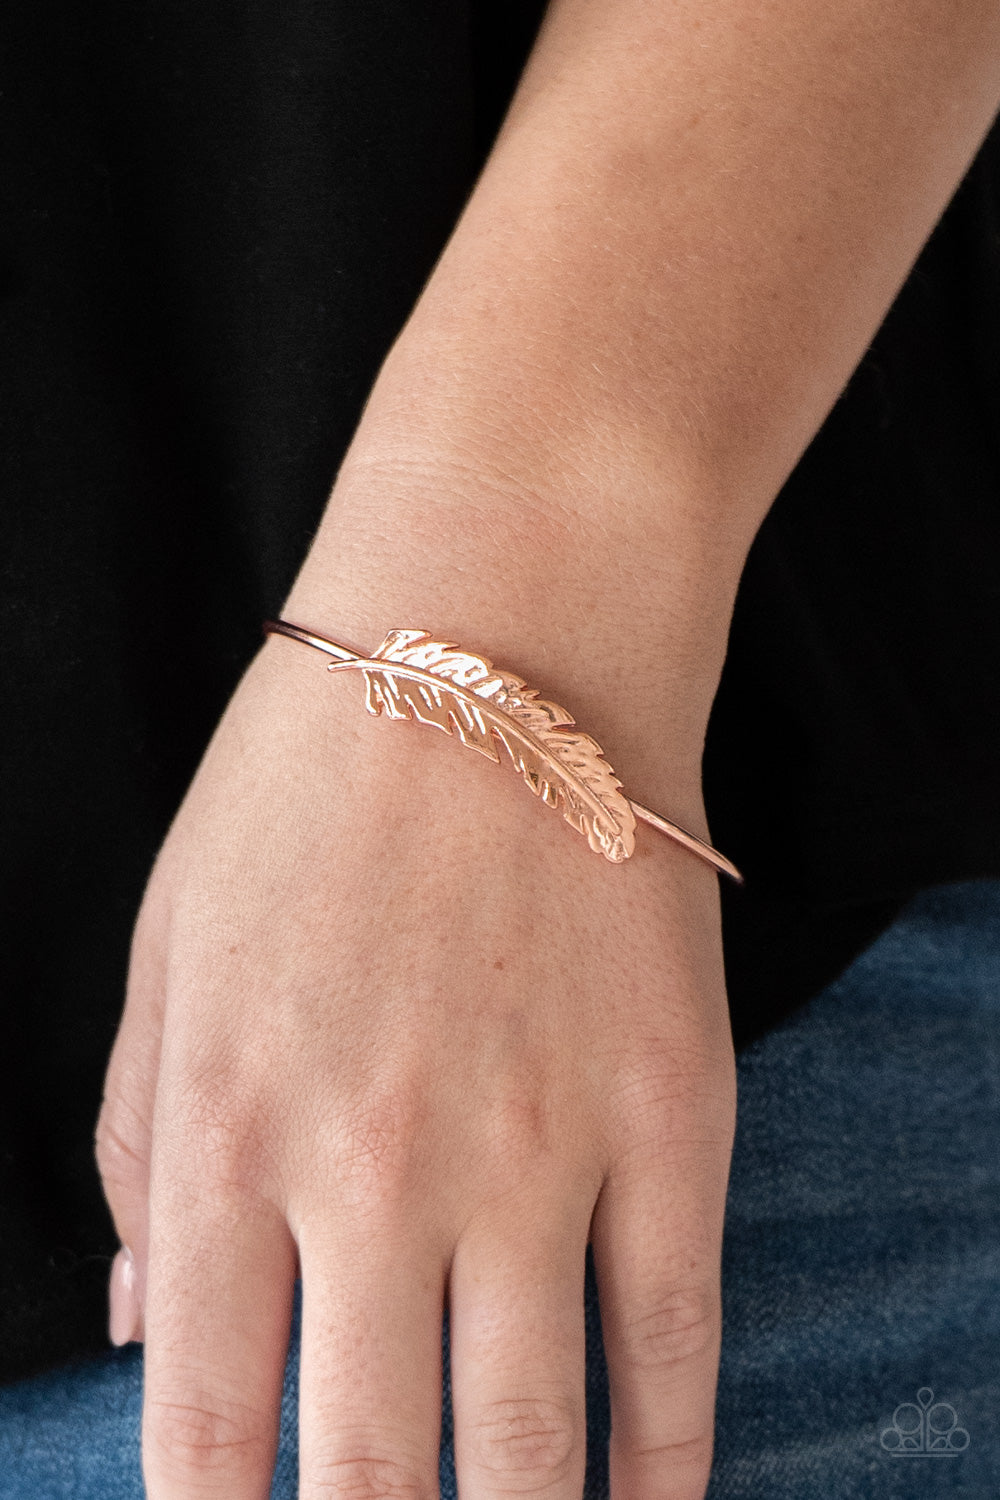 How Do You Like This FEATHER? - Copper - Pretykimsbling